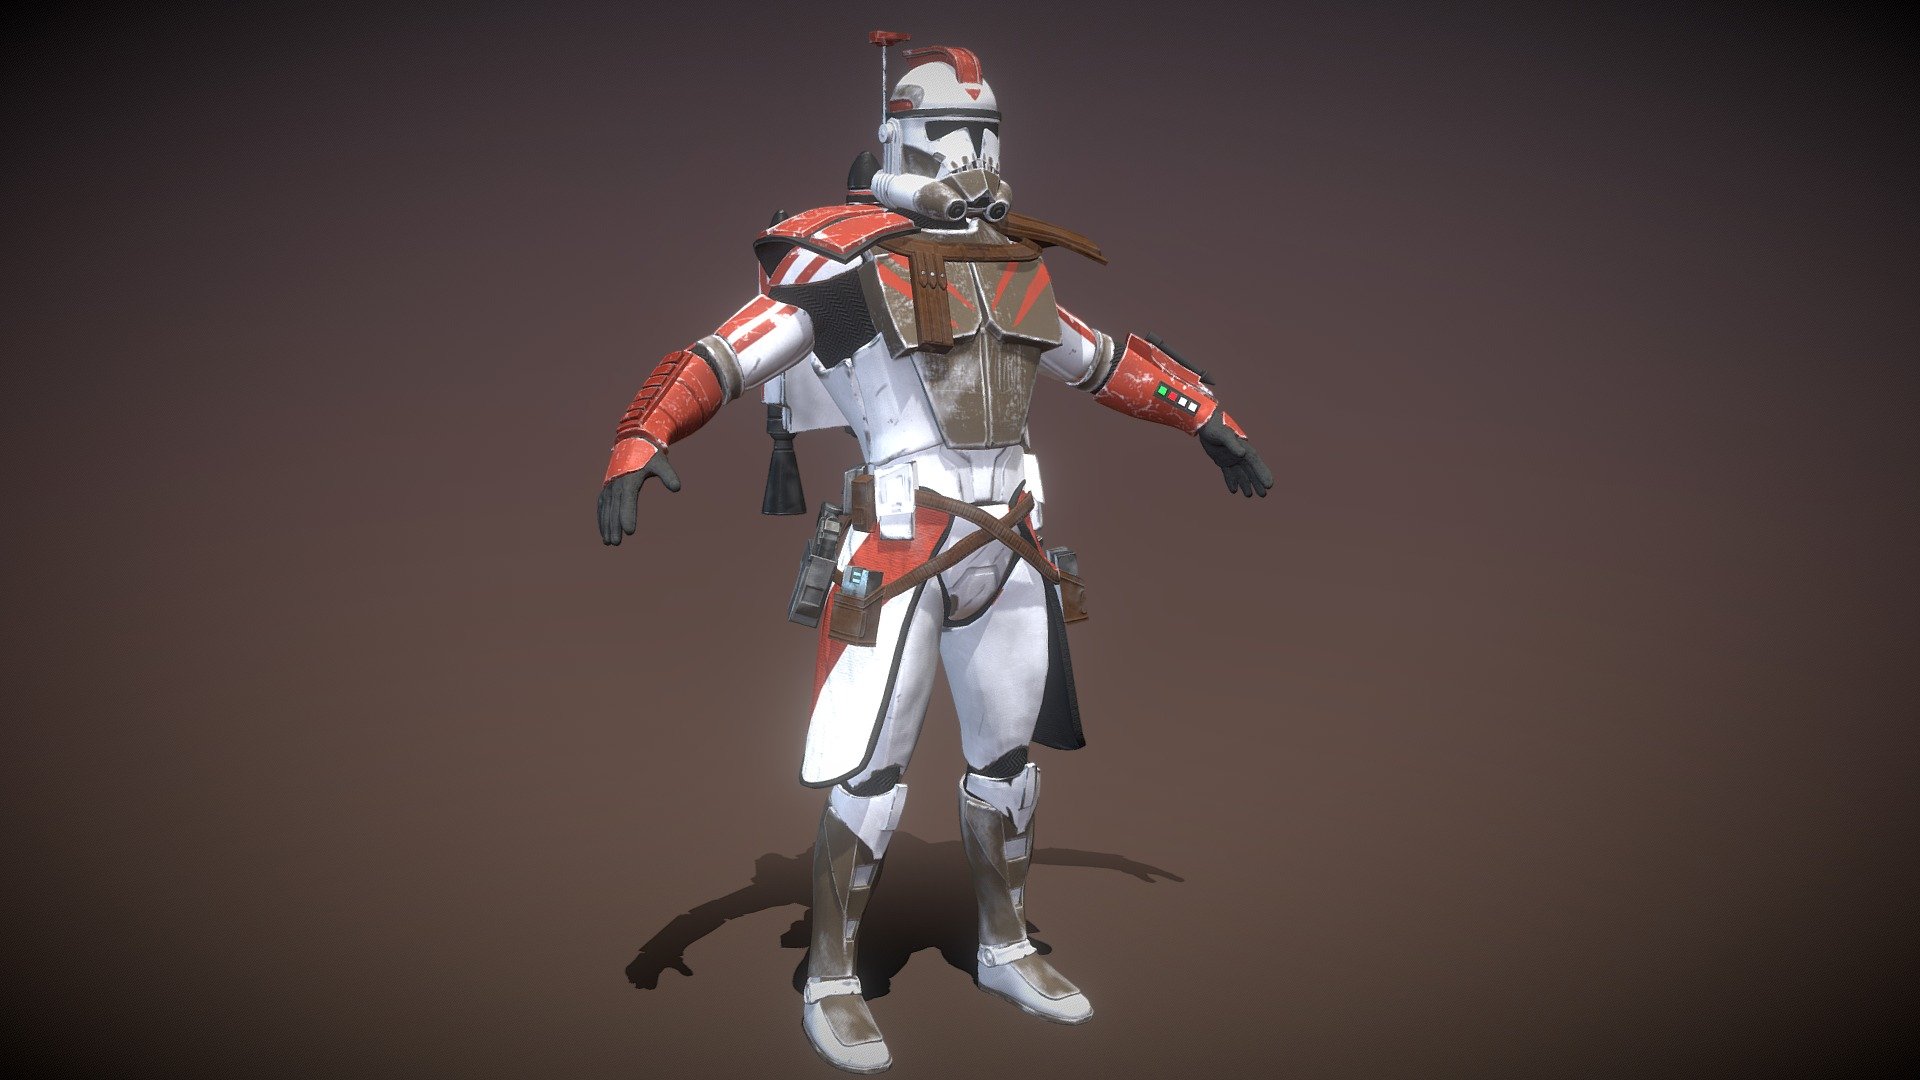 An Arc Clone Trooper Soldier ready for a Game Engine, I included the OBJ and FBX.MA And Blender file the model has 28004 verts, 54471 edges, 26635 polys, 51460 tris Textures are 4096 x 4096 legs, torso, pistol and jetpack. Each has diffuse, roughness, metallic, normal and the necessary has emissive maps png if you need 3D Game Artist or 3D Printing artist I can do commission works 3d model